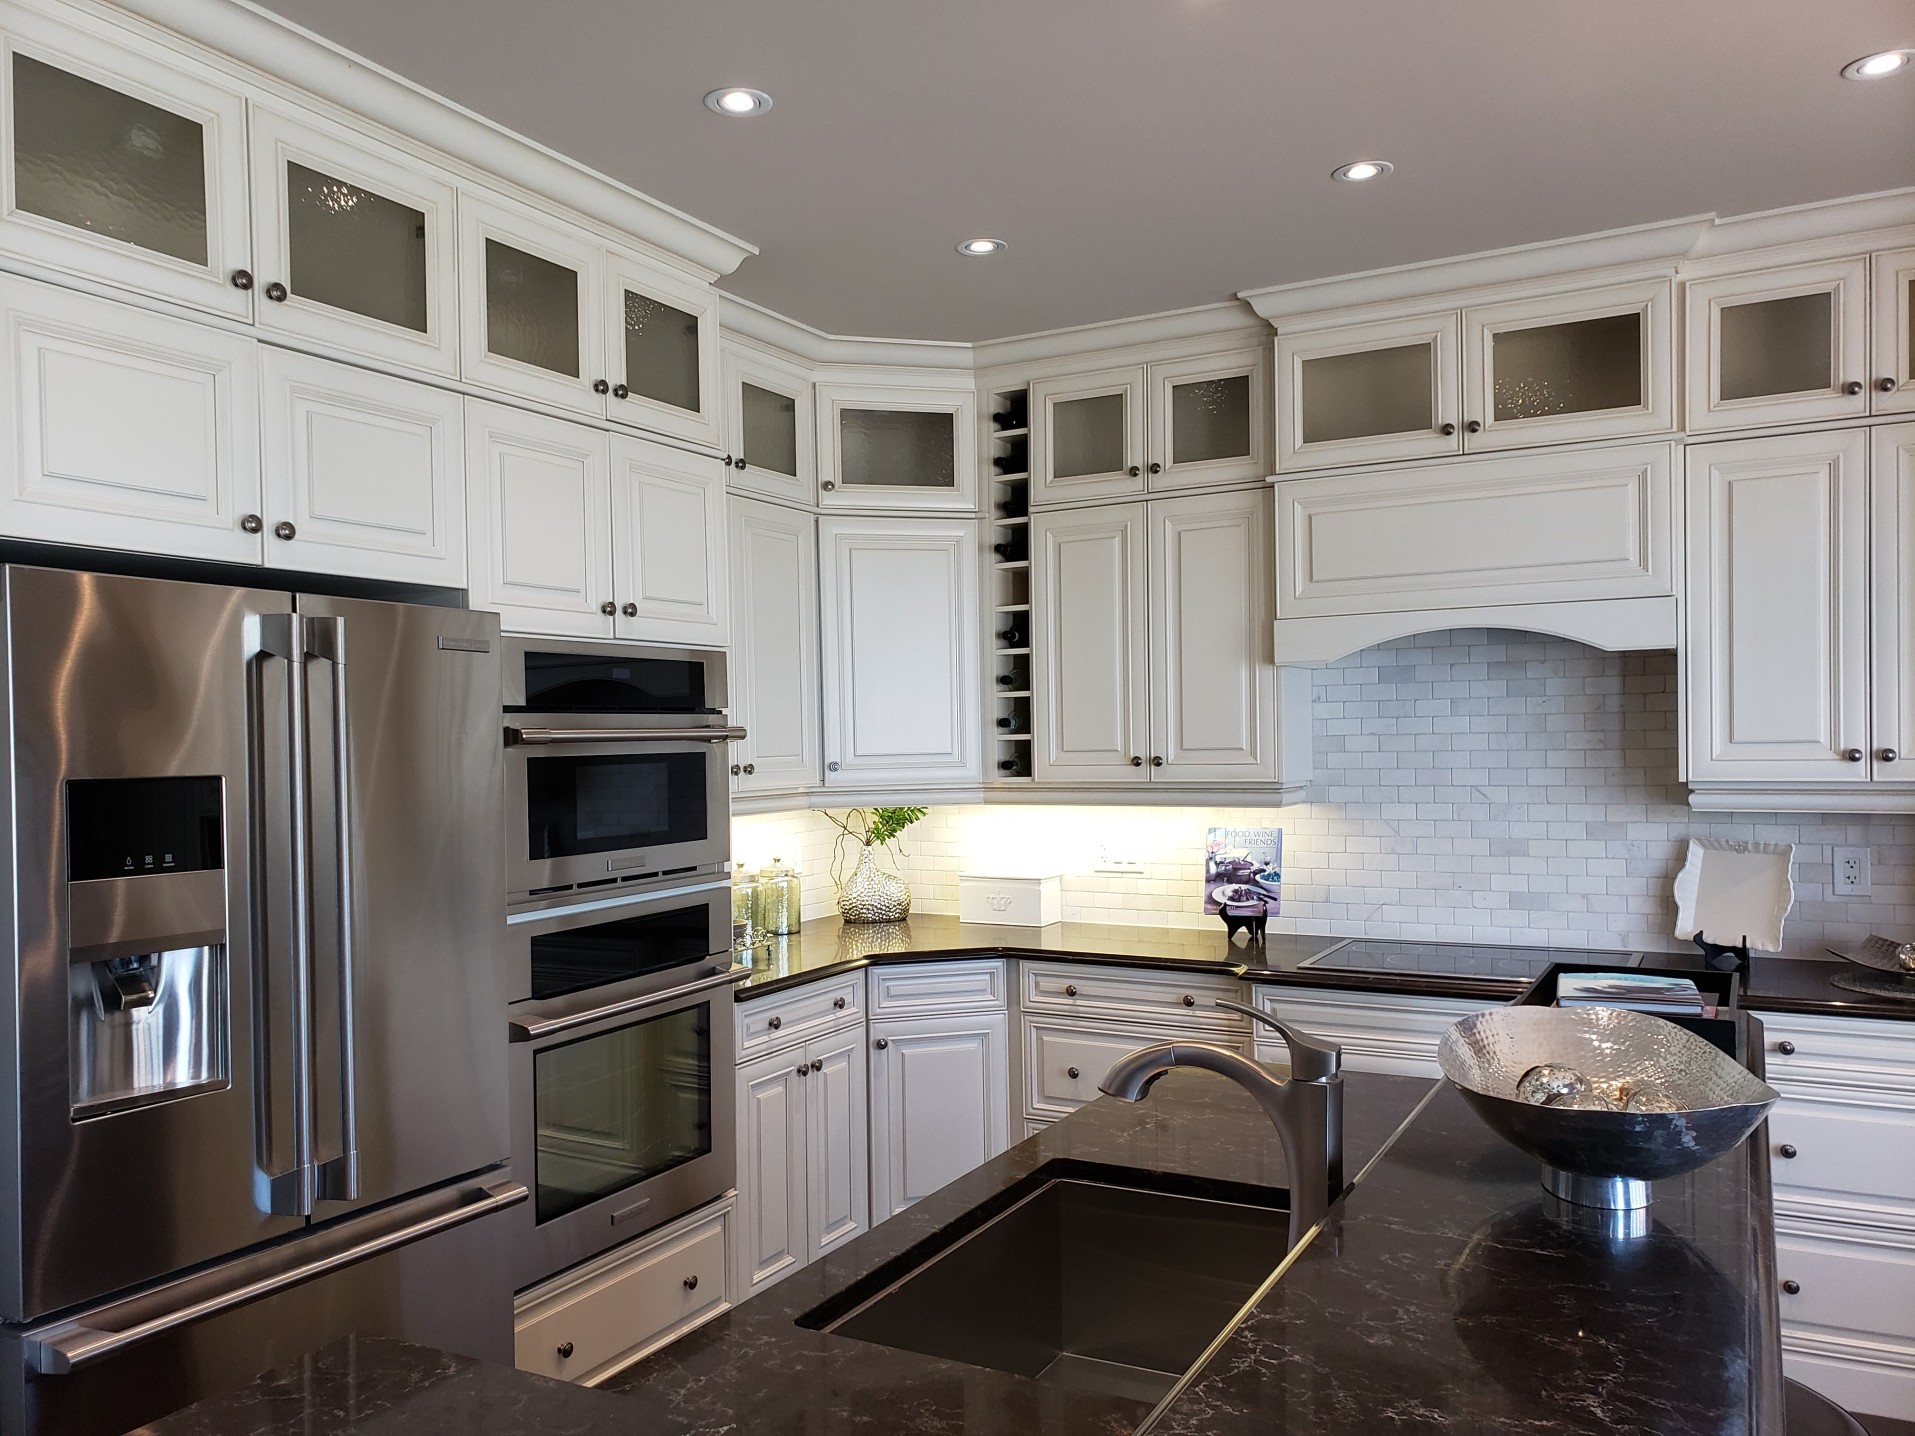 How to clean wooden kitchen cabinets